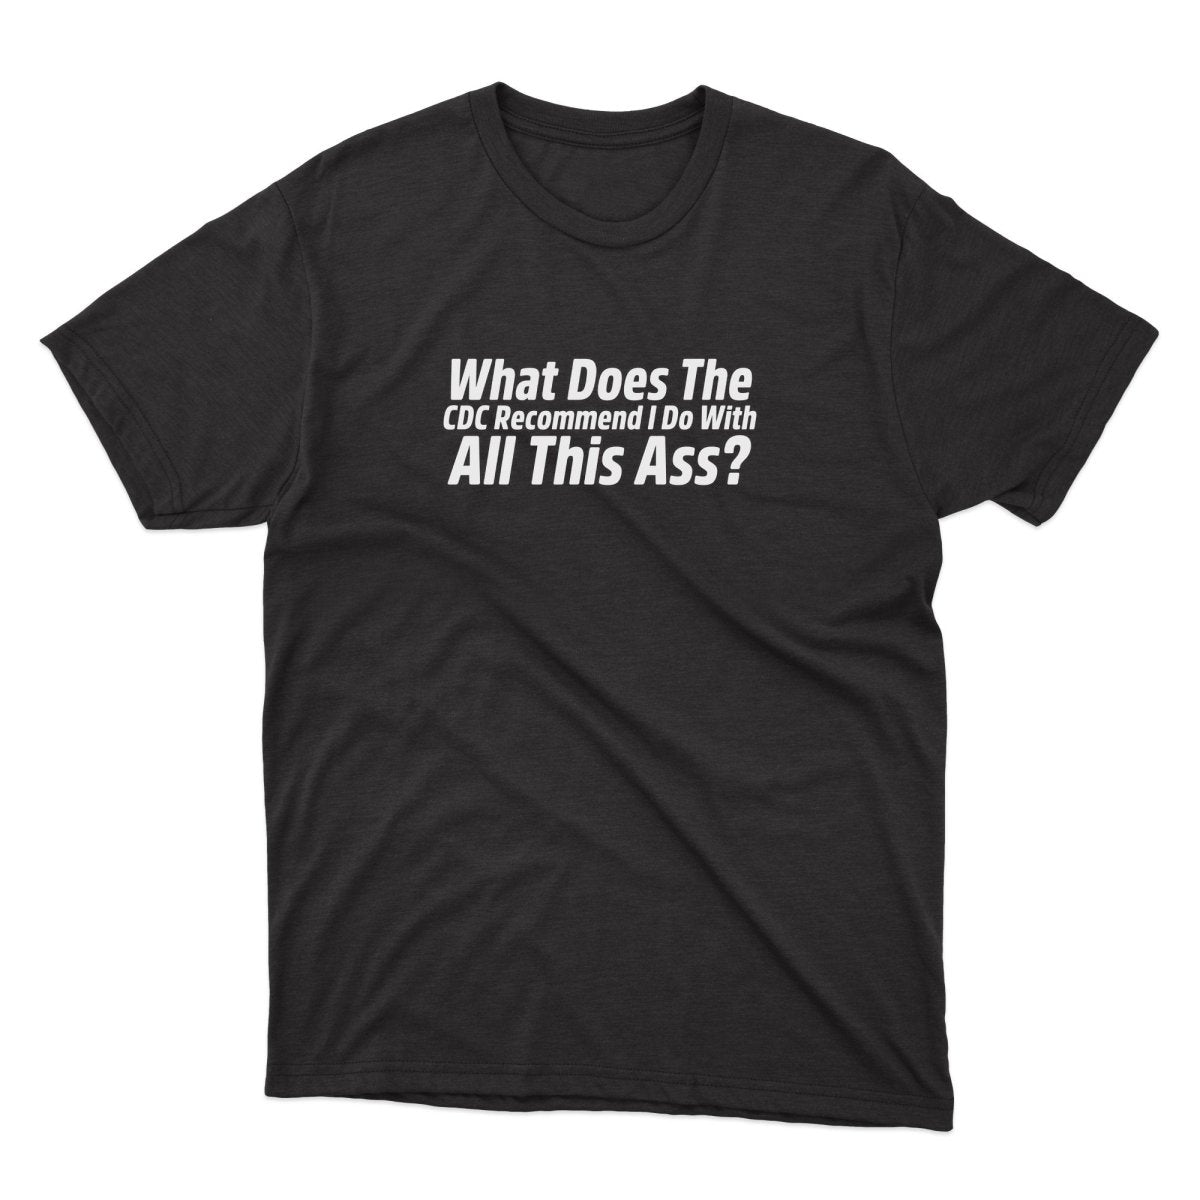 What Does The CDC Recomend Shirt - stickerbullWhat Does The CDC Recomend ShirtShirtsPrintifystickerbull23567059000800896043BlackSa black t - shirt that says what does the gc recommend to do with